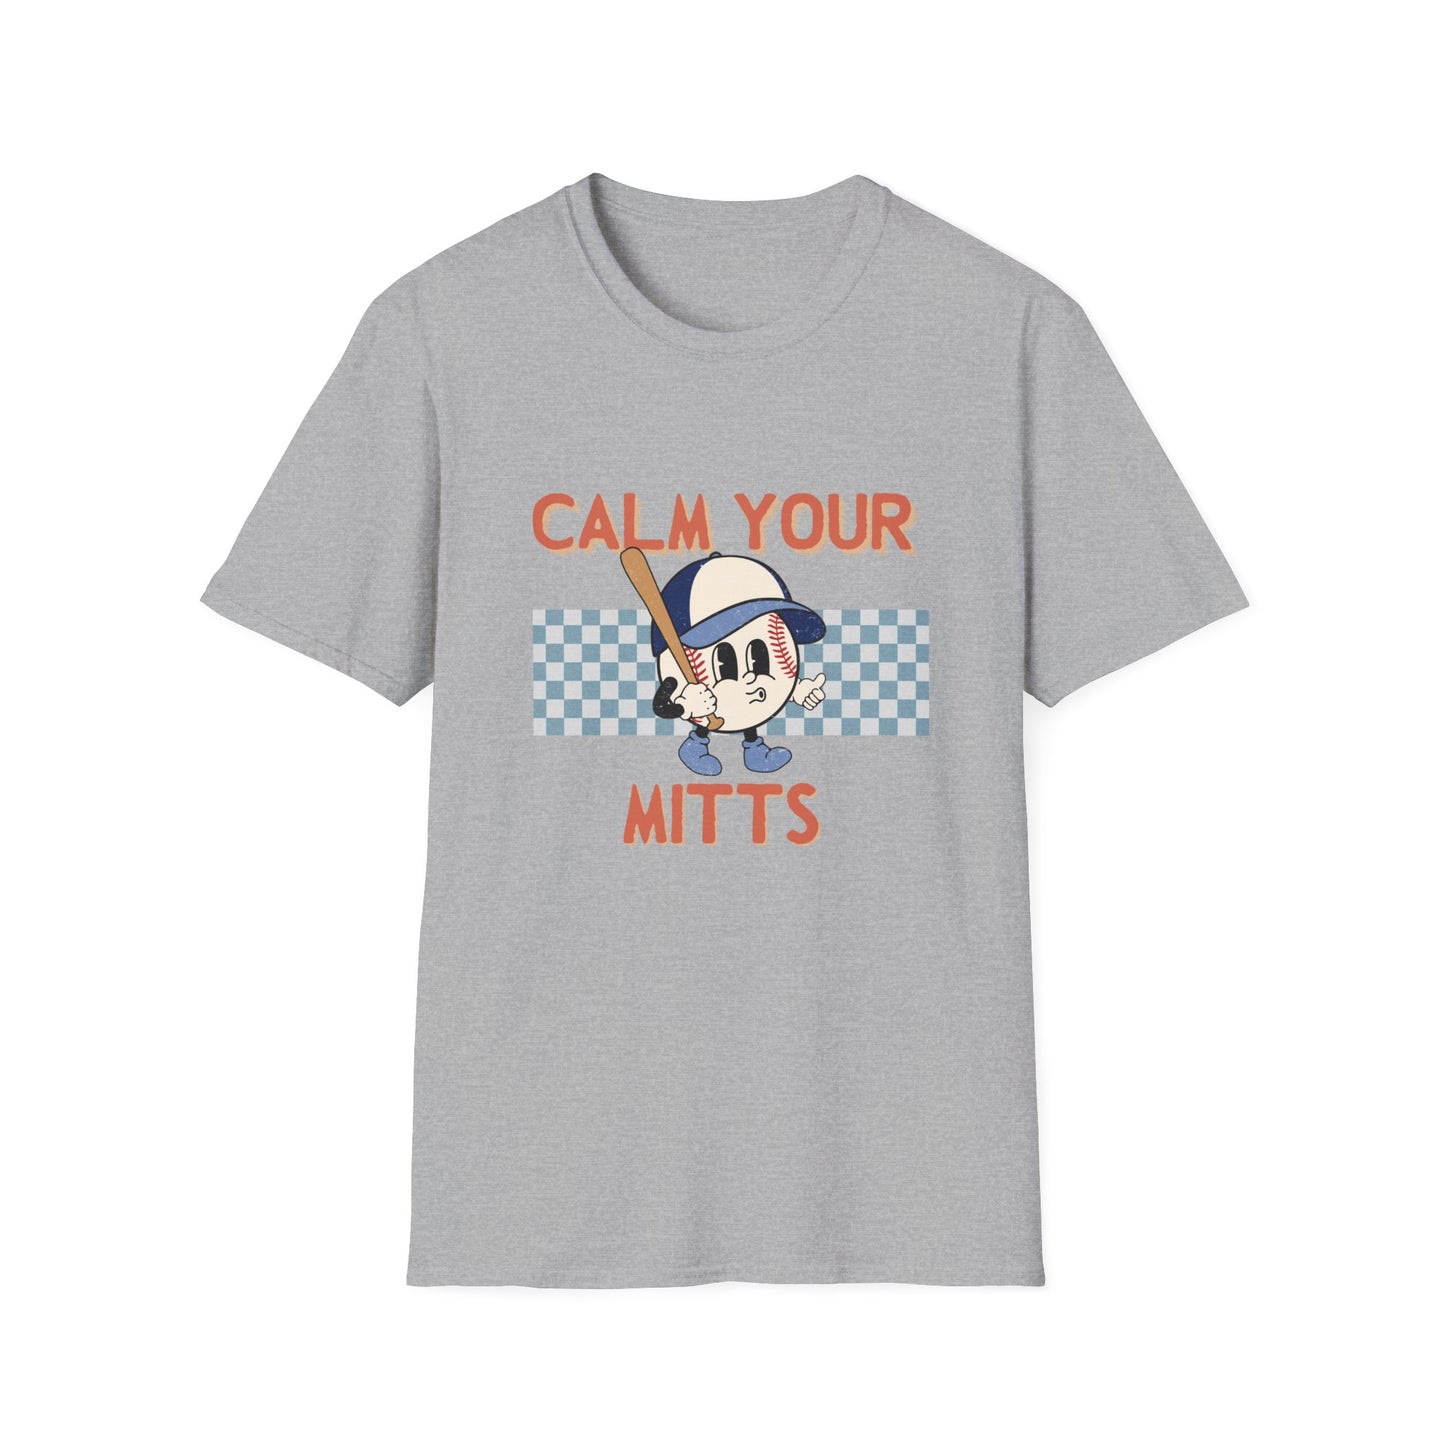 Calm Your Mitts Tee